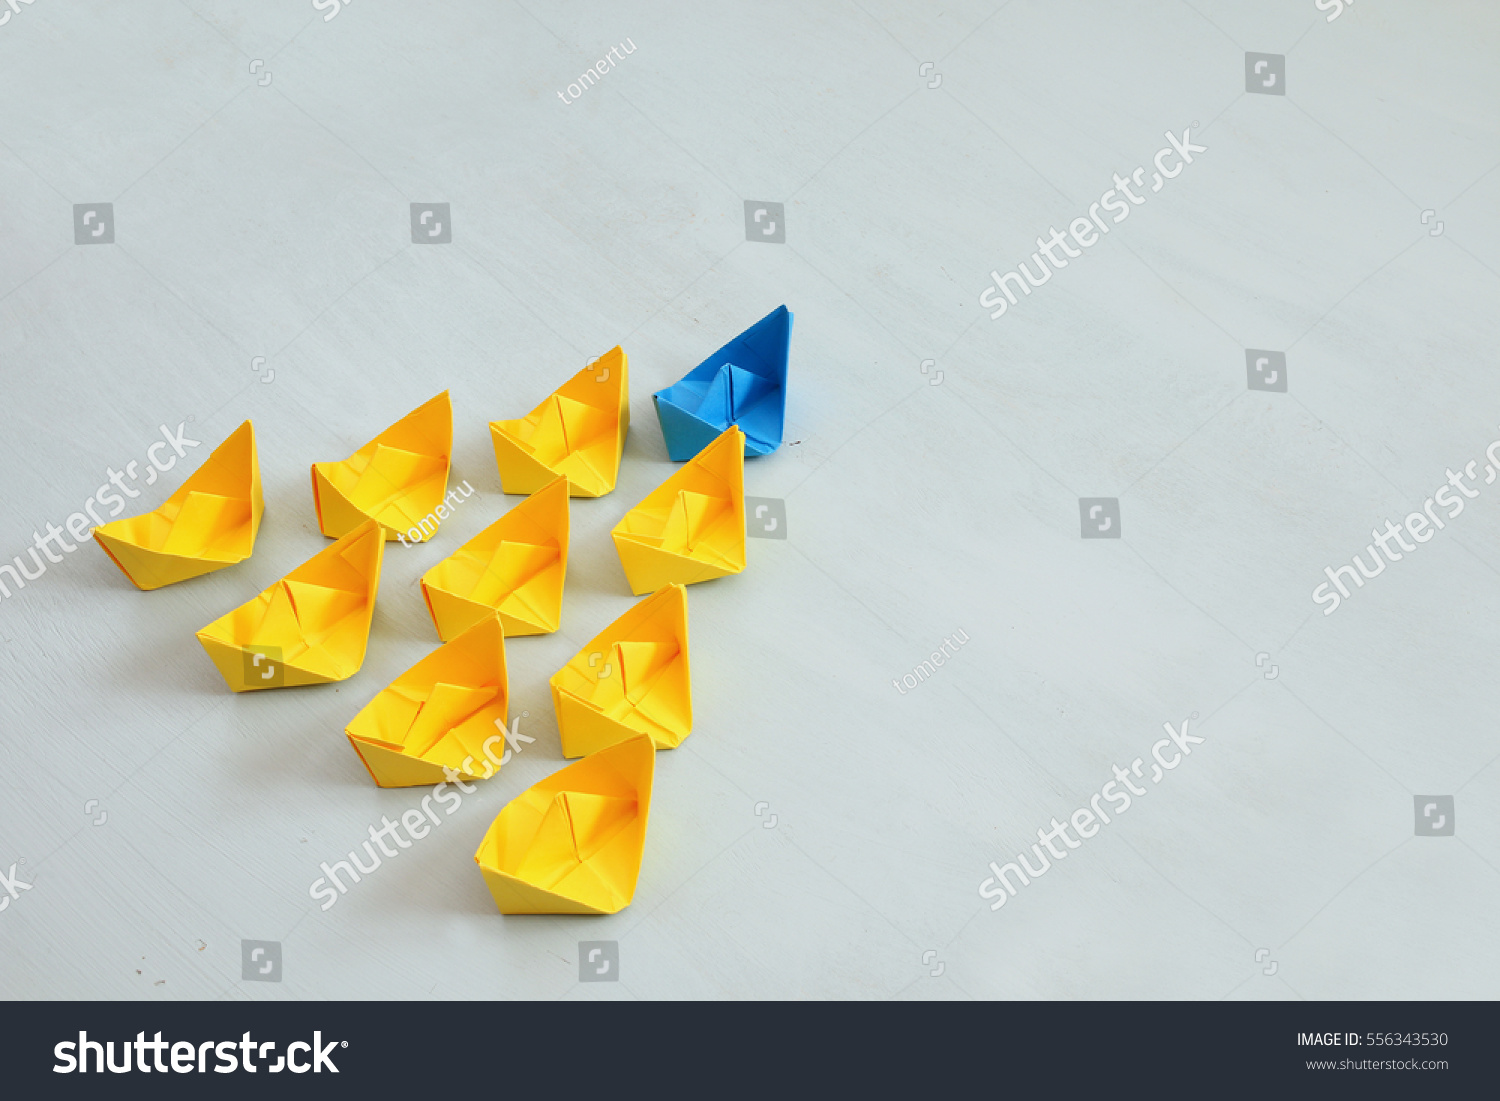 Leadership concept with paper boats on blue wooden background. One leader ship leads other ships. Filtered and toned image #556343530